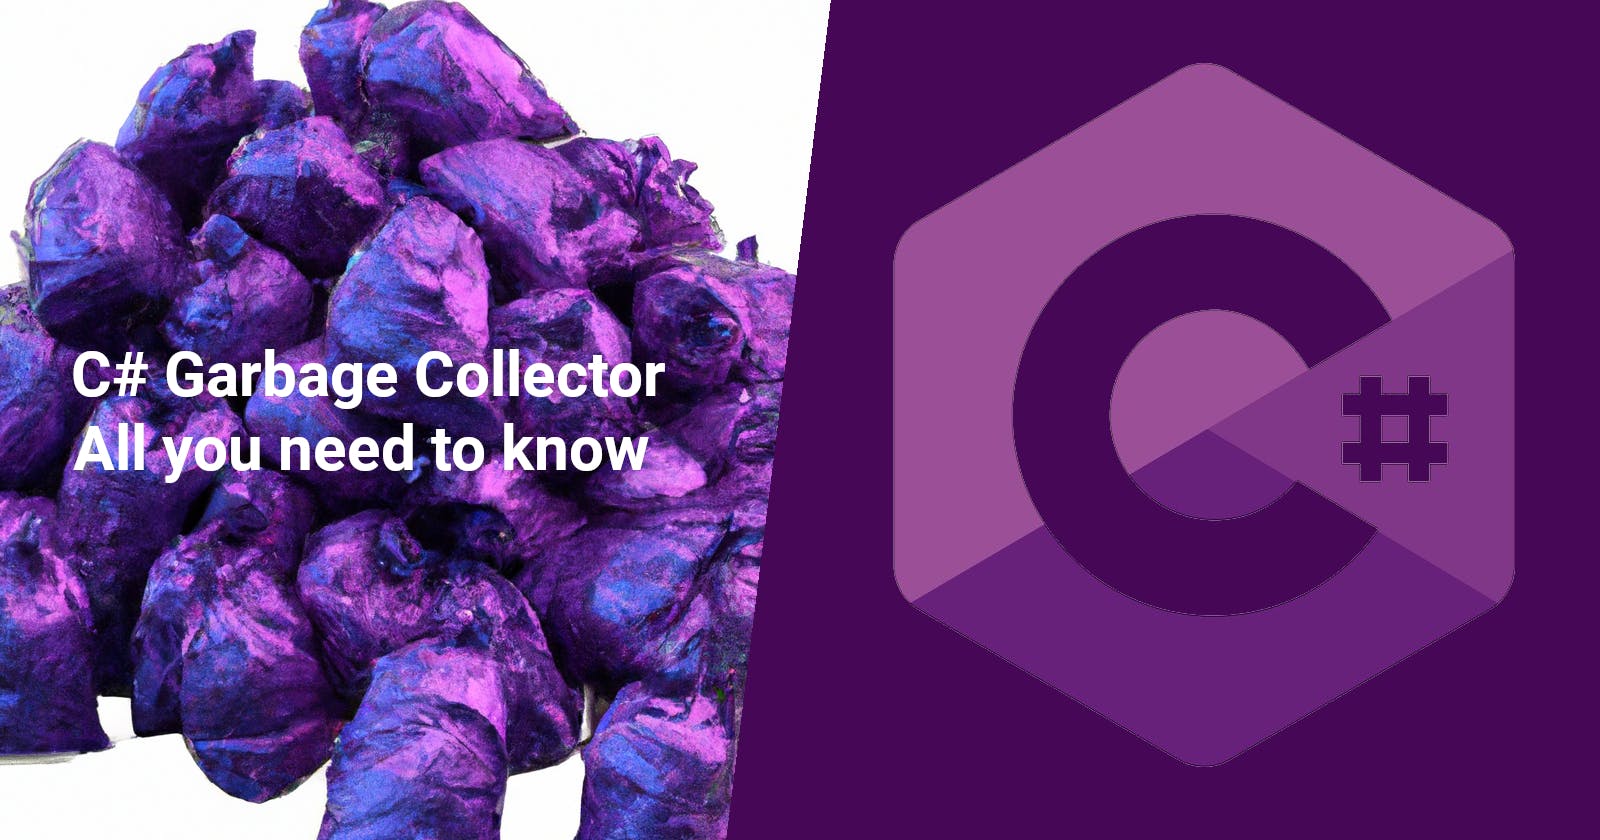 C# Garbage Collector